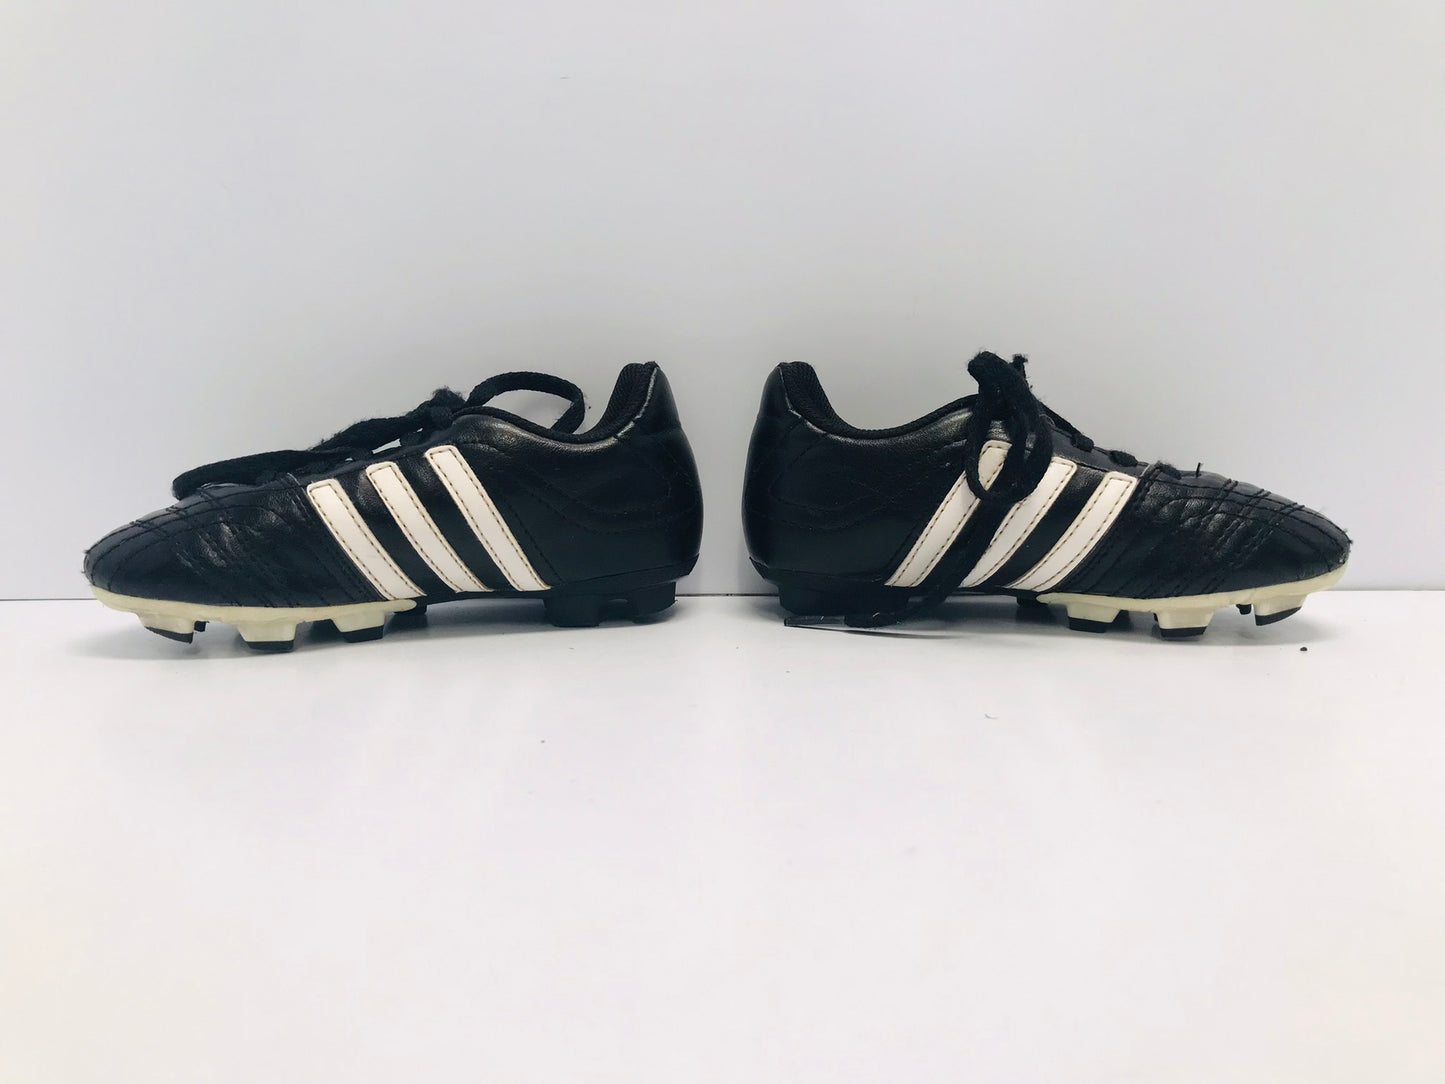 Soccer Shoes Cleats Child Size 11 Adidas Black White Excellent